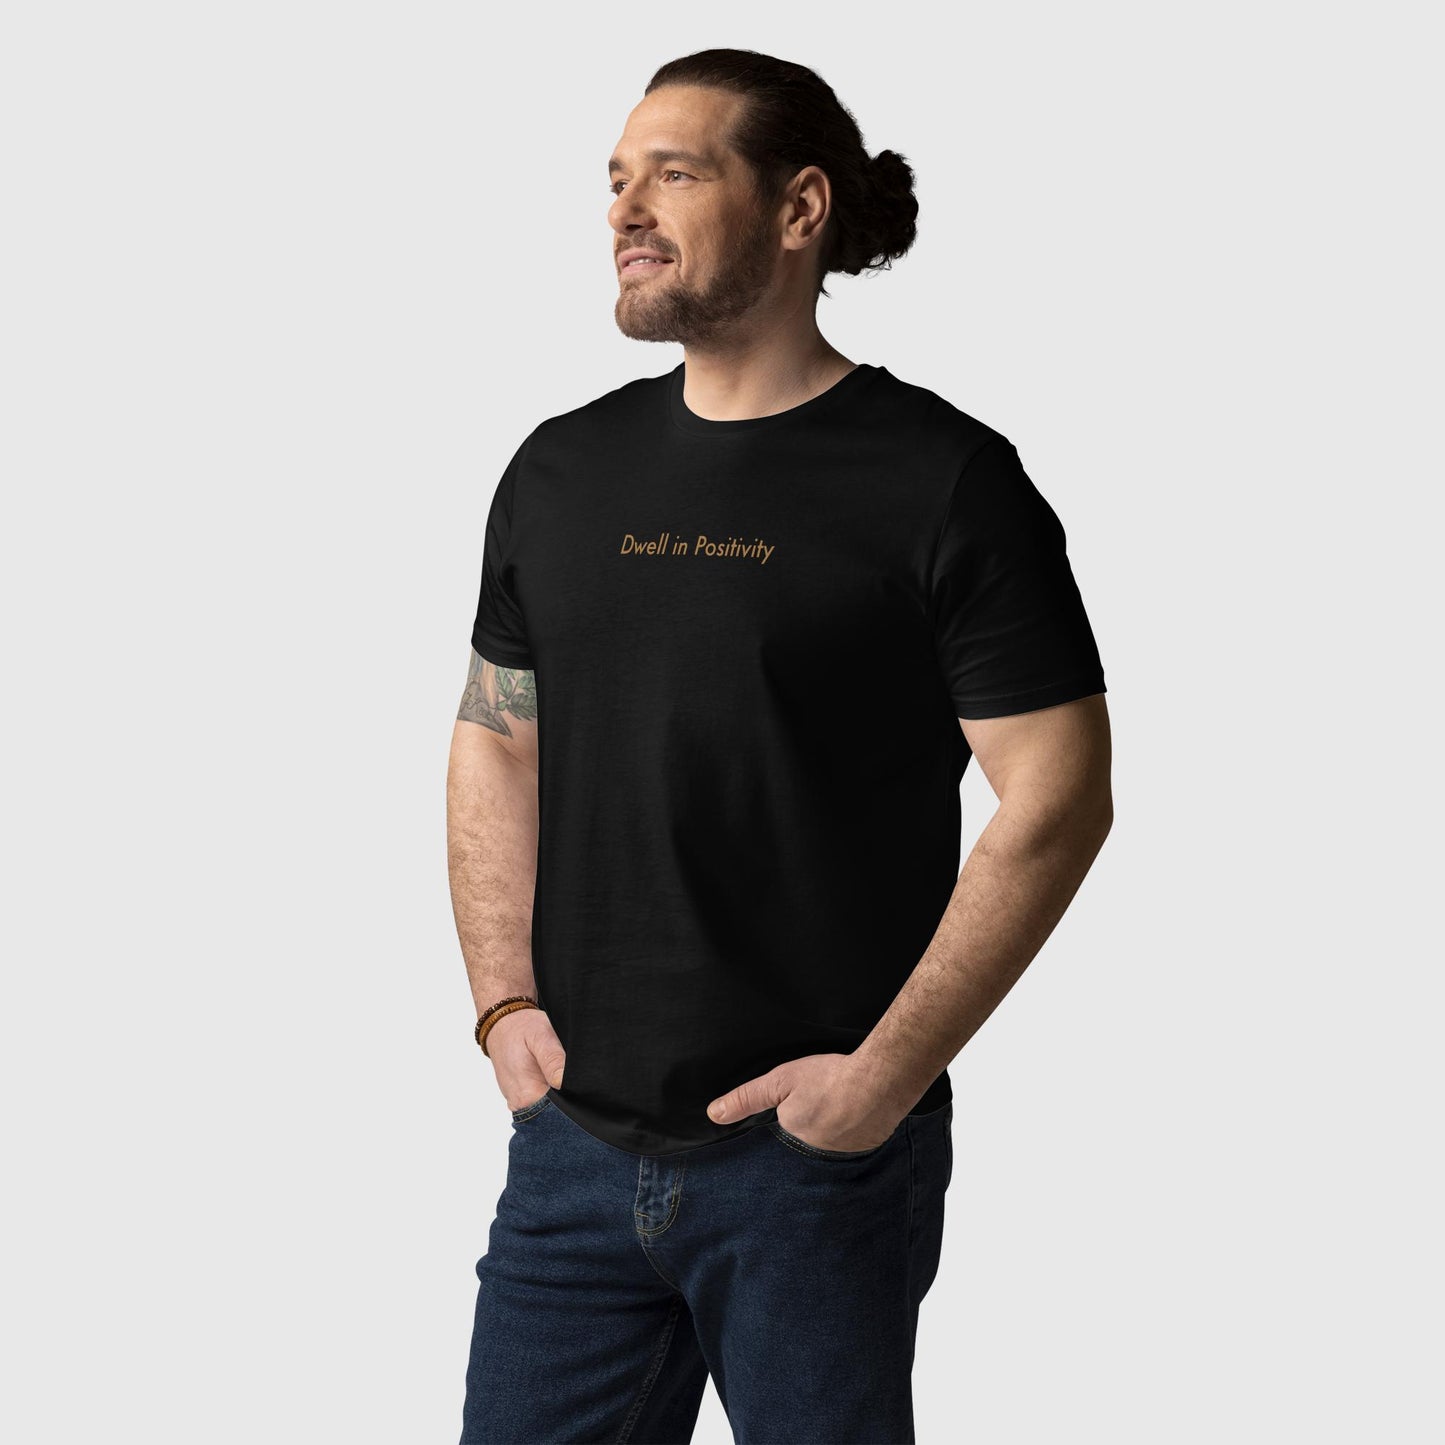 Men's black organic cotton t-shirt that features Emily Dickinson's quote, "I dwell in positivity."